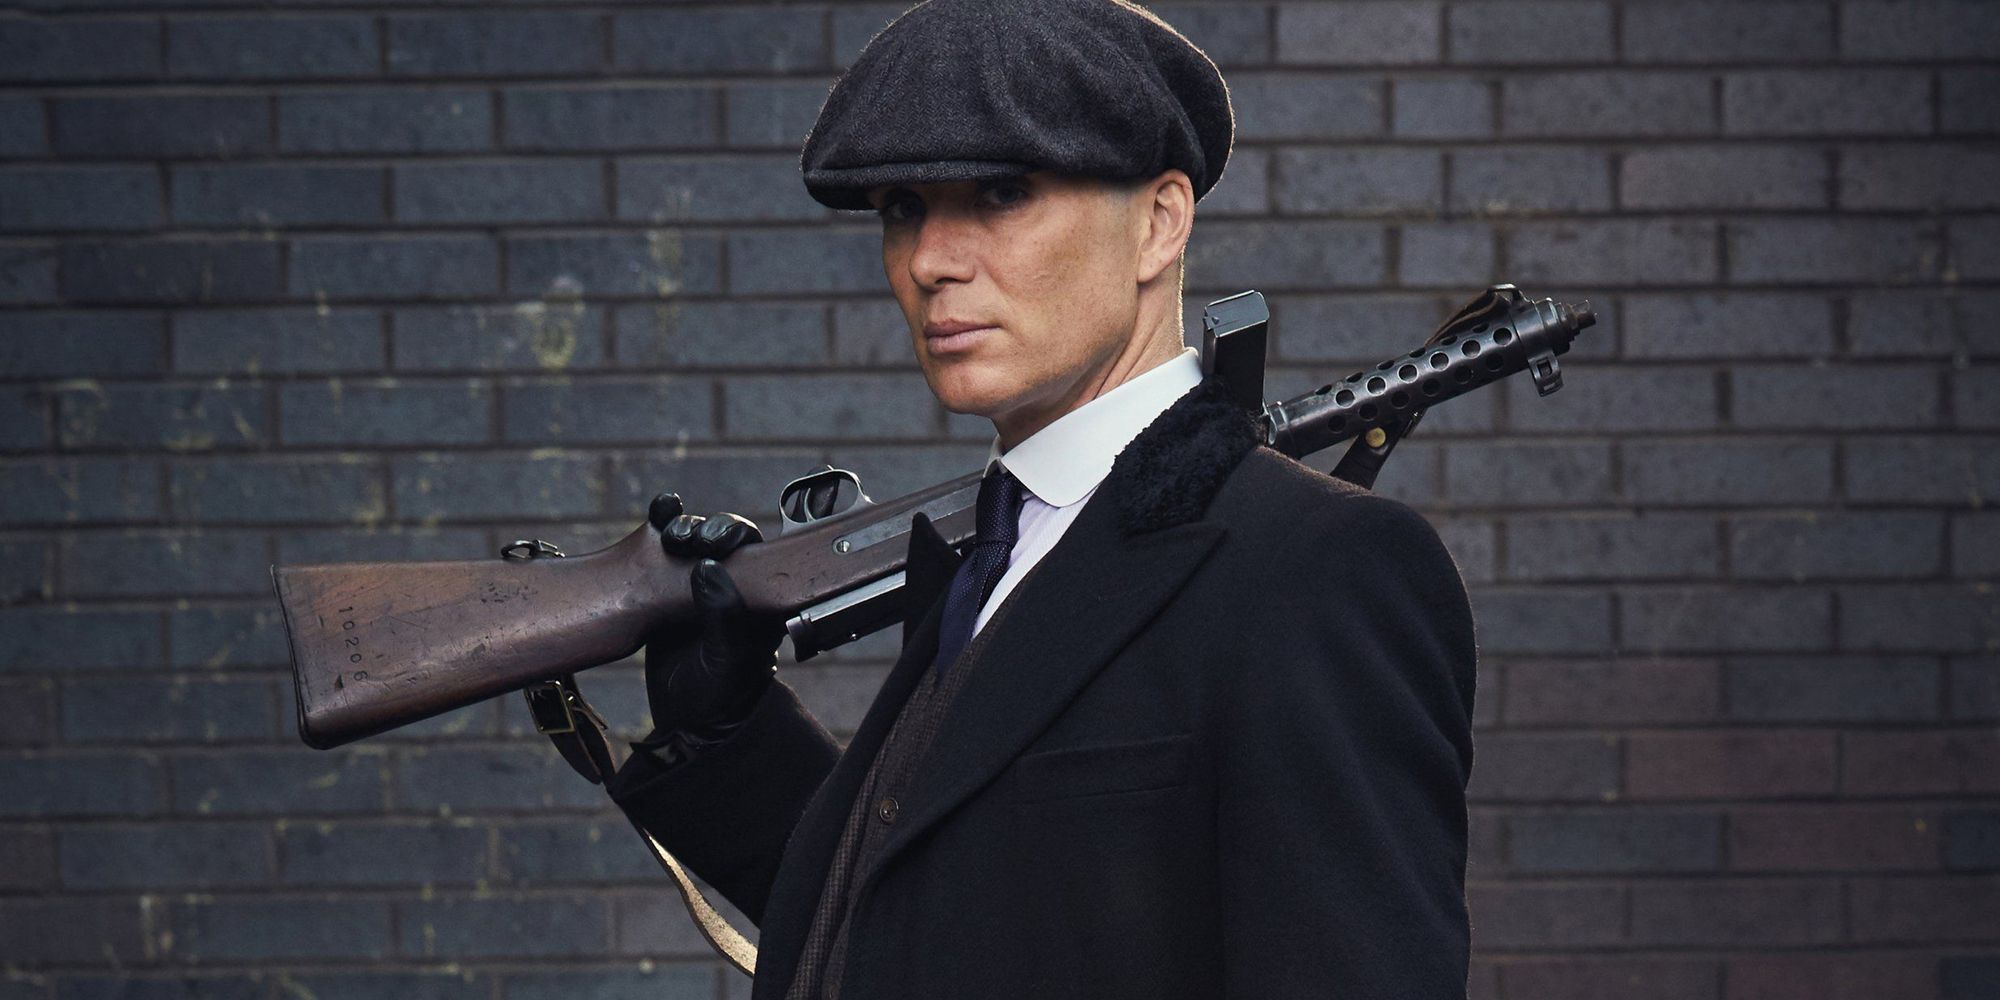 Peaky Blinders Season 6 Cast Guide: All New & Returning Characters